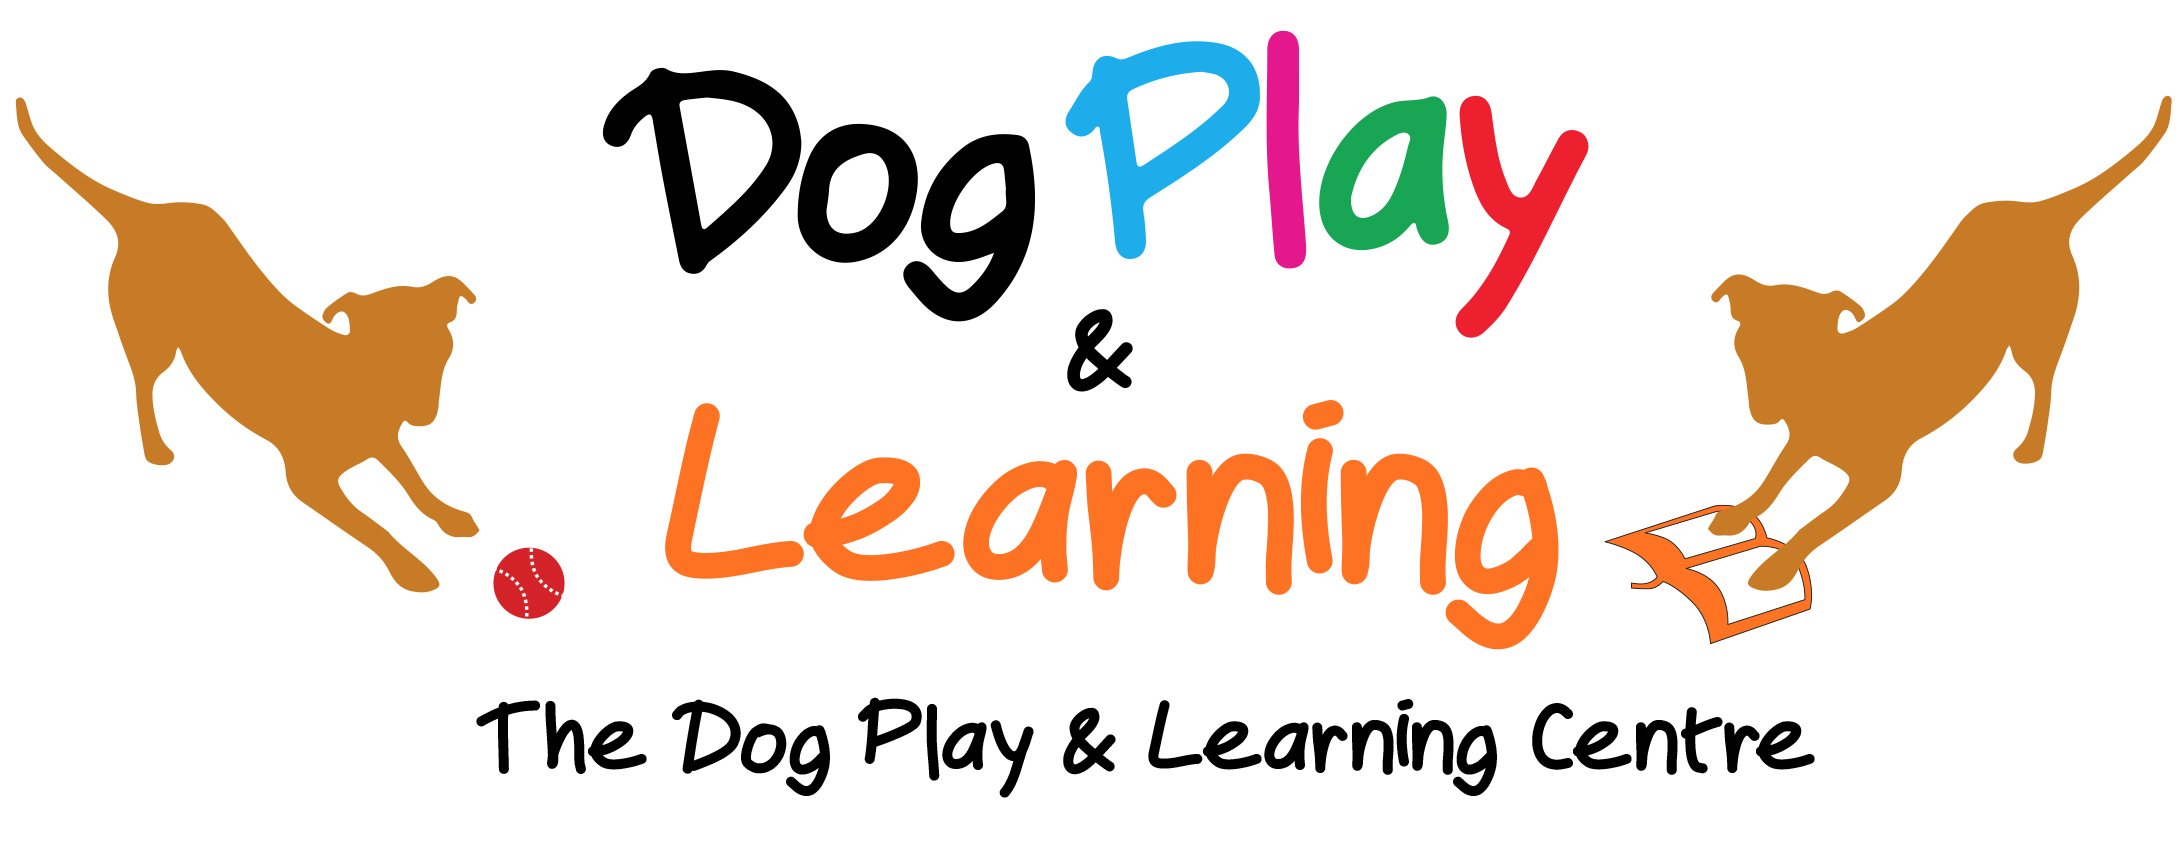 The Dog Play & Learning Centre